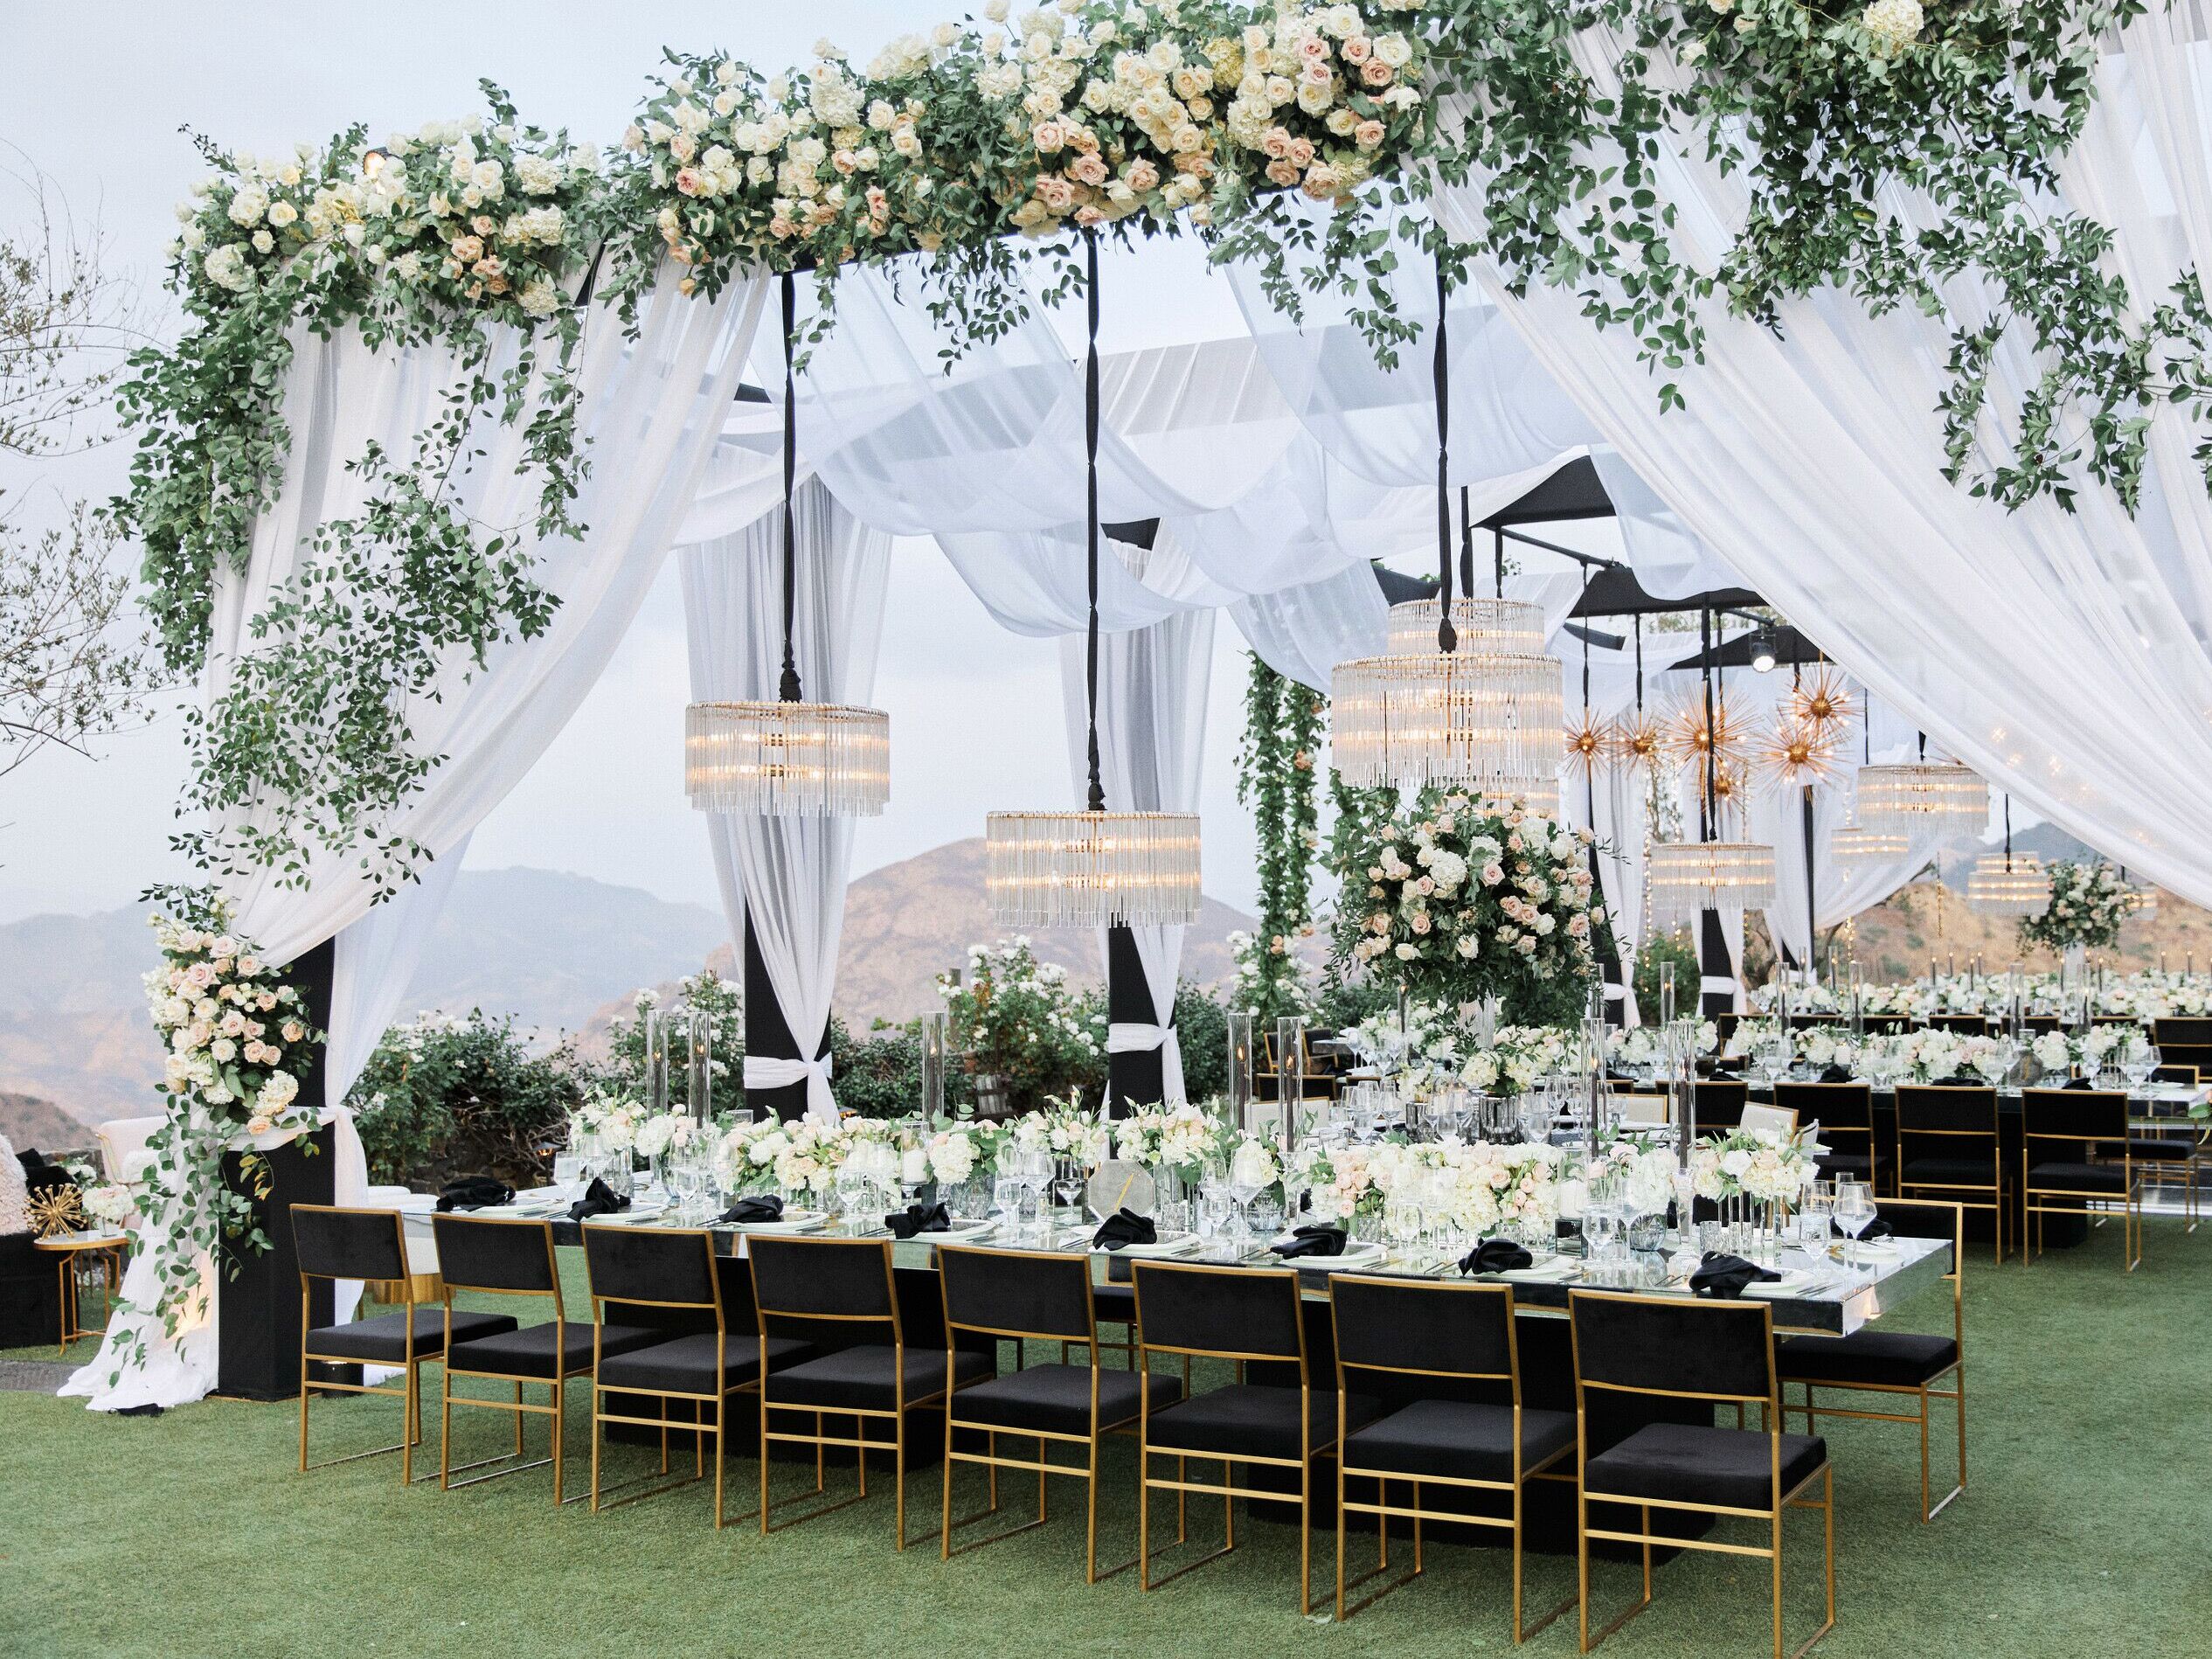 luxury outdoor wedding reception with white fabric draped across square canopies decorated with chandeliers, greenery and roses